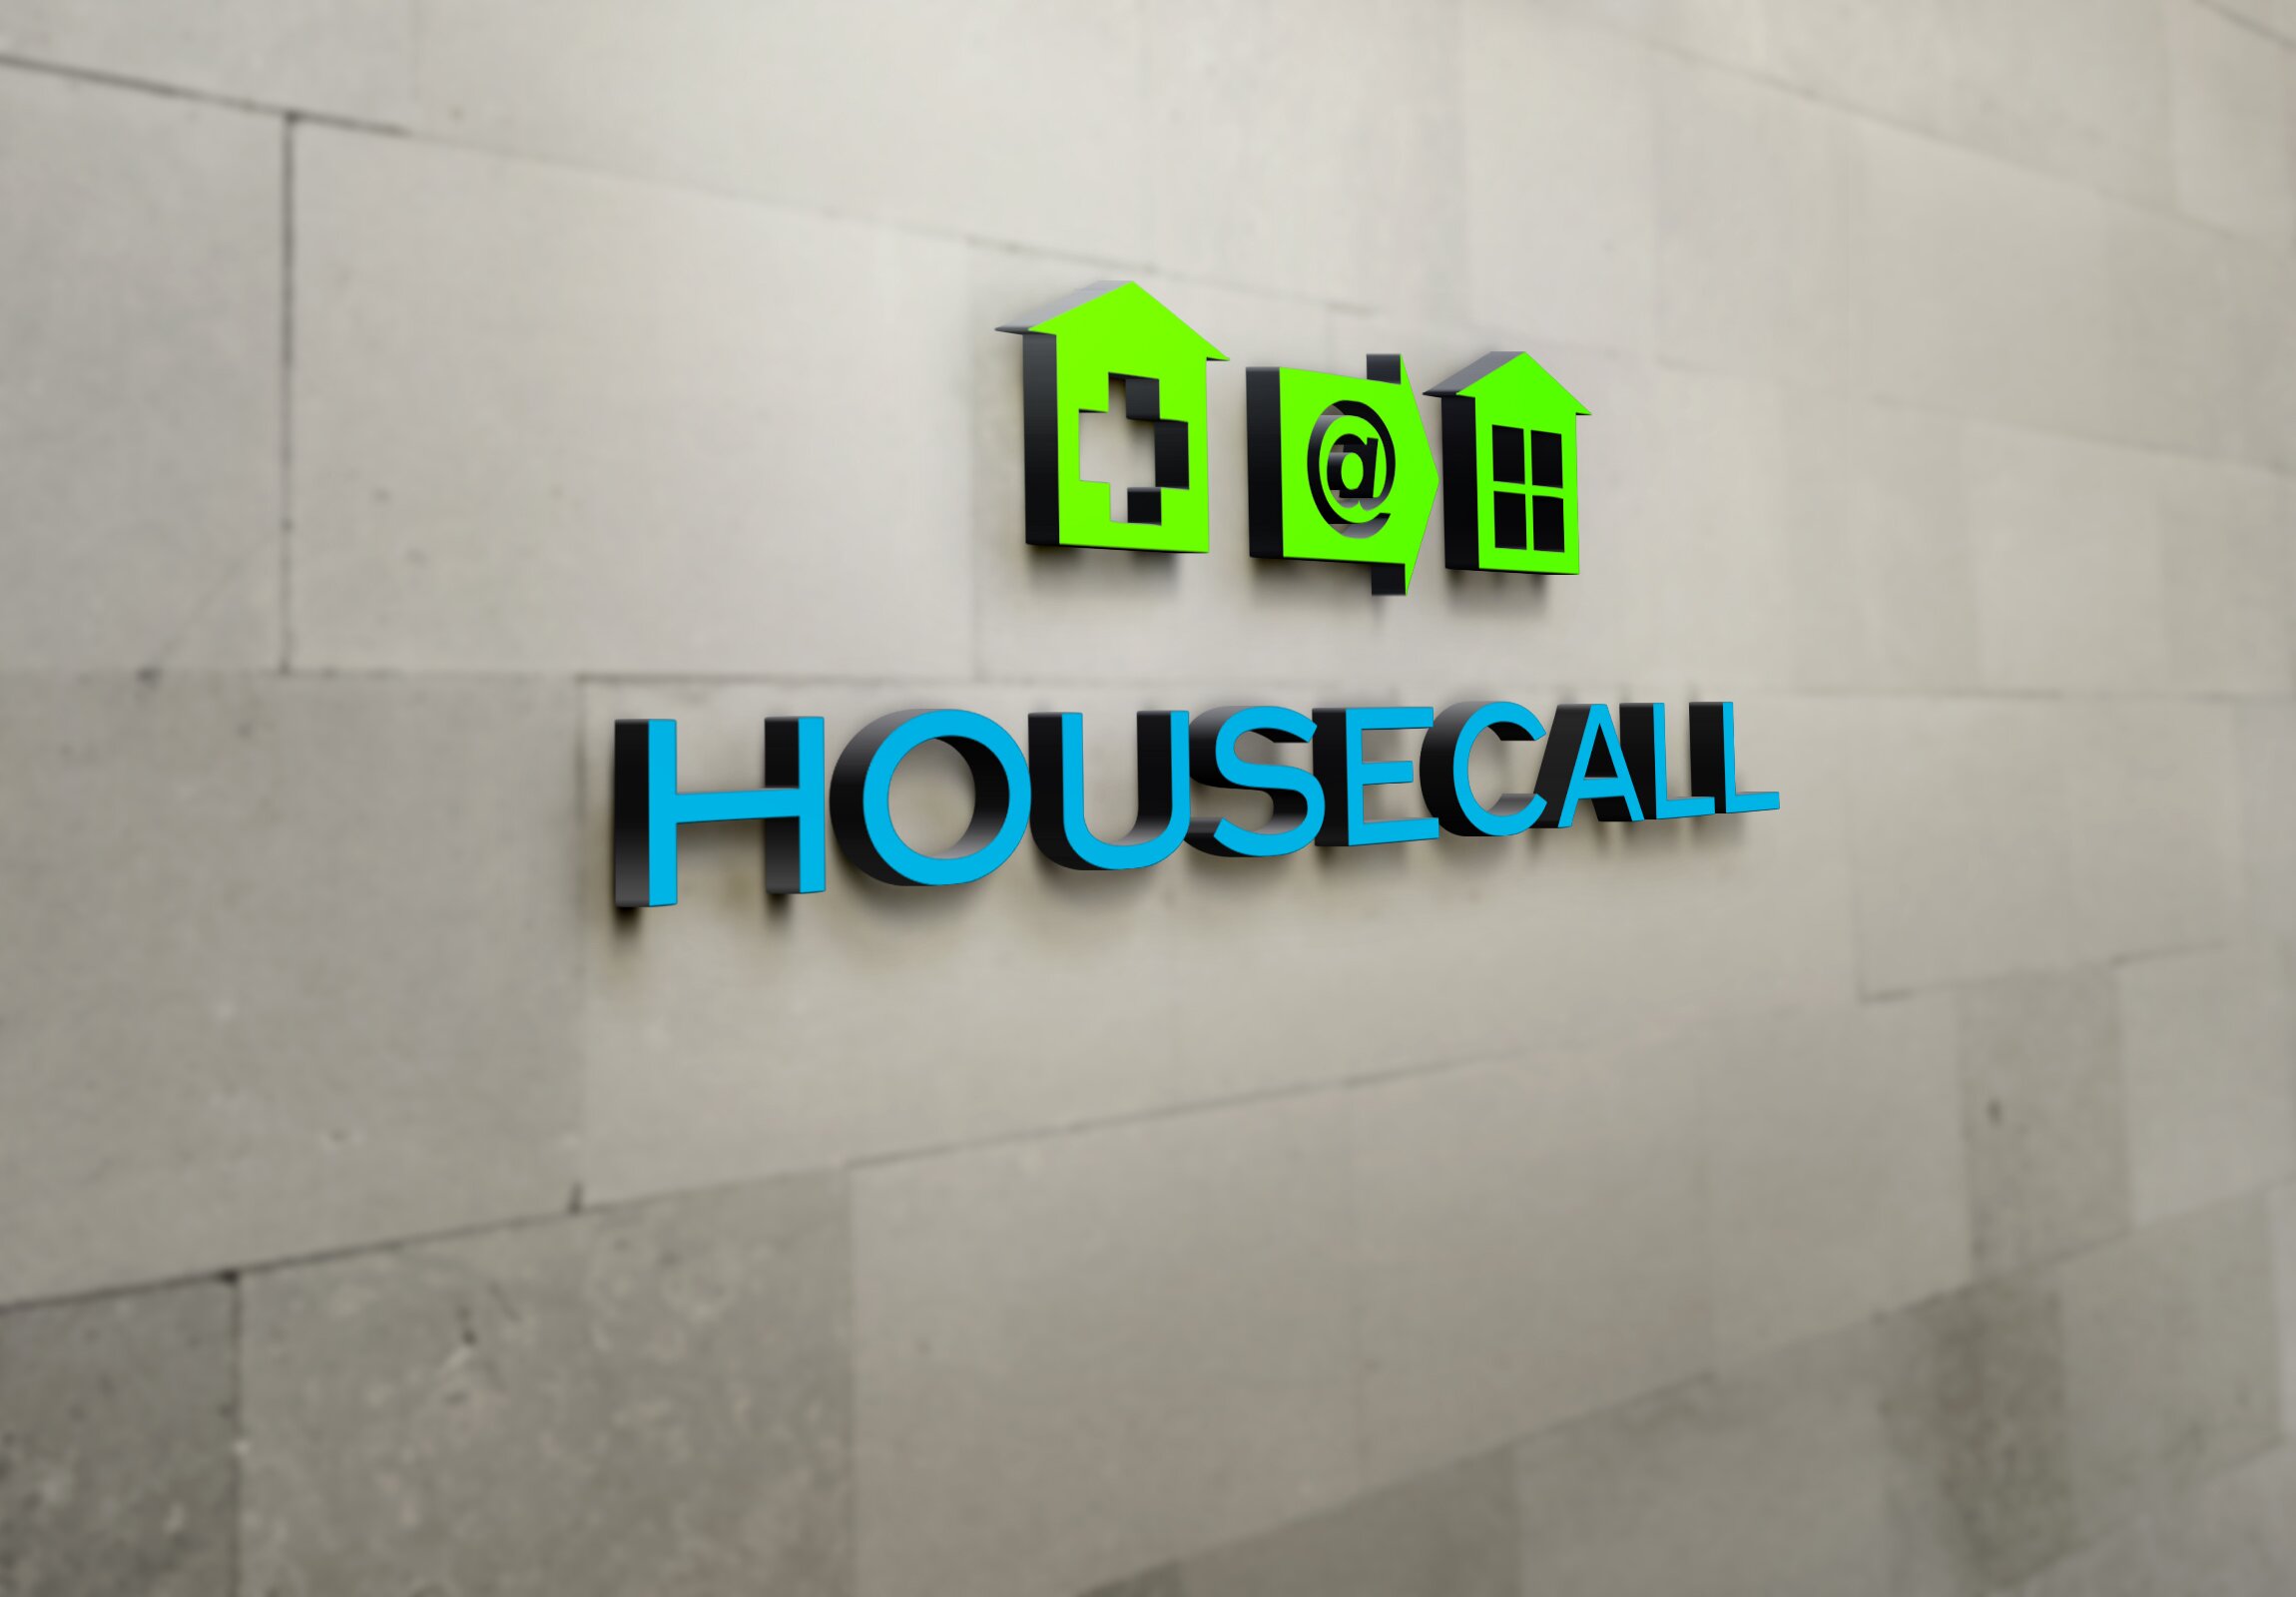 Housecall connects people to Chiropractors to change their lives and improve Chiropractic practice profitability.